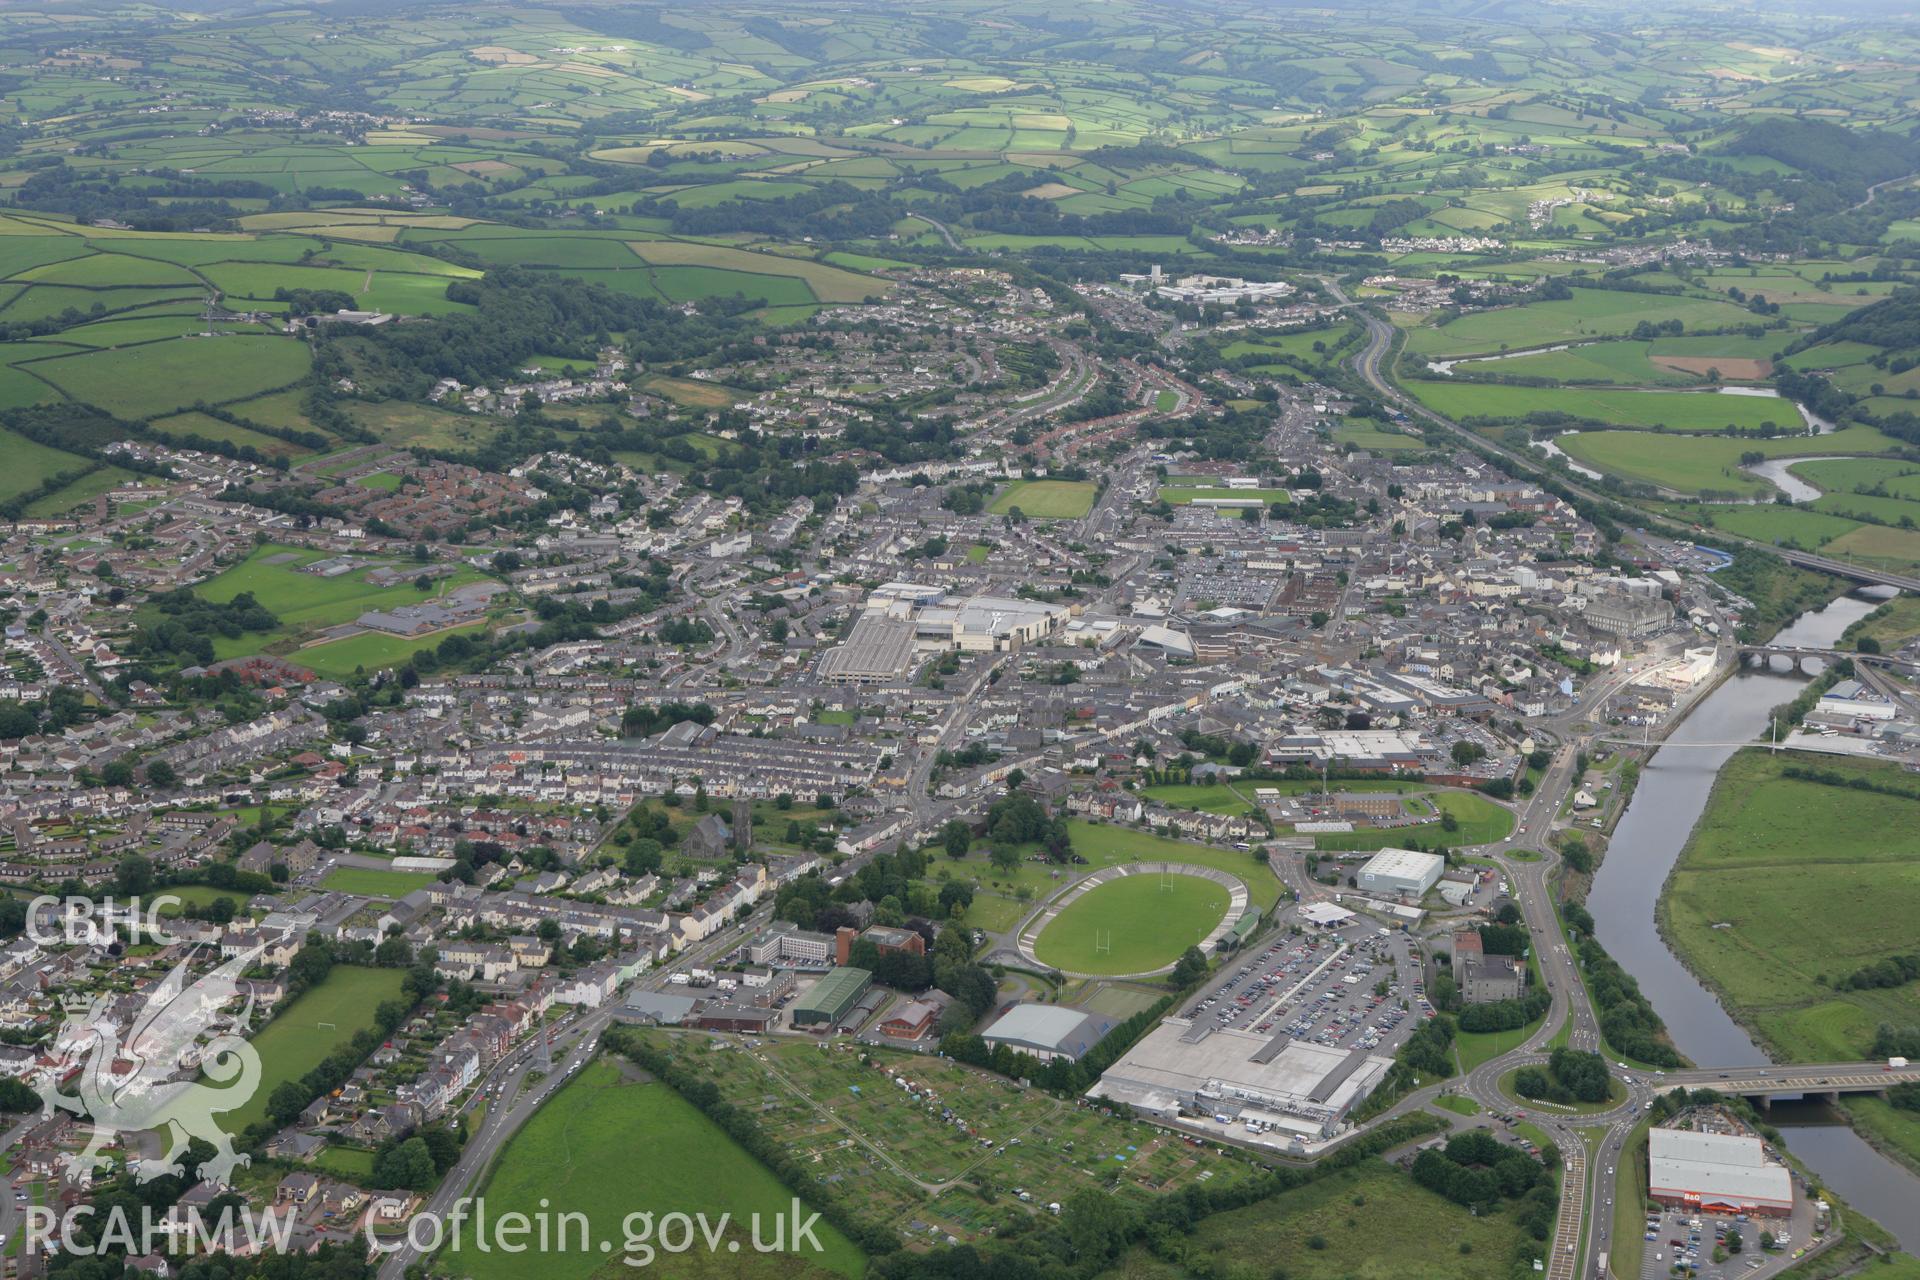 RCAHMW colour oblique photograph of Carmarthen, from the west. Taken by Toby Driver on 29/07/2010.